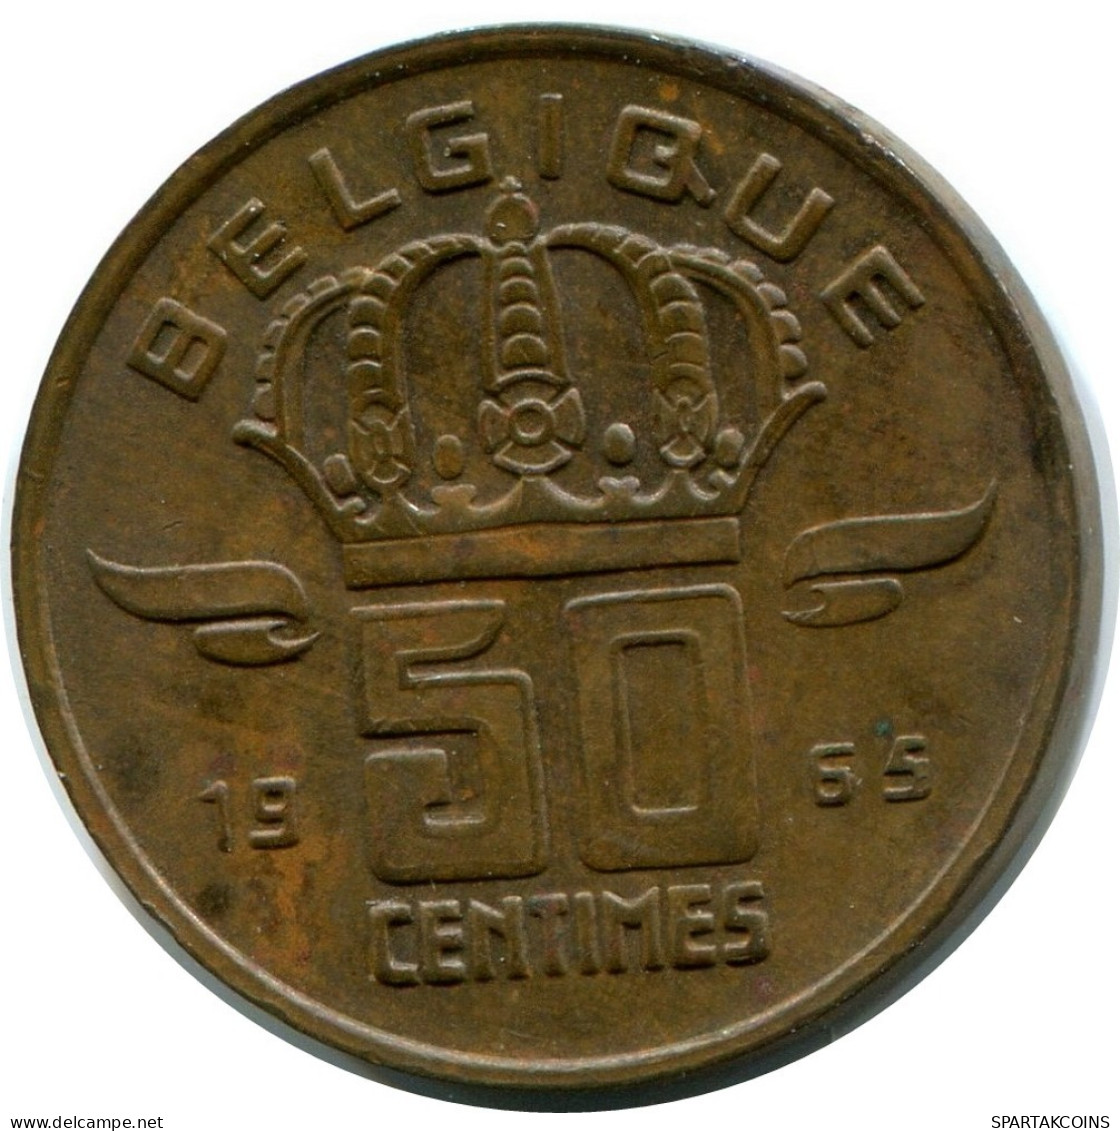 50 CENTIMES 1965 FRENCH Text BELGIUM Coin #AW923.U.A - 50 Cents